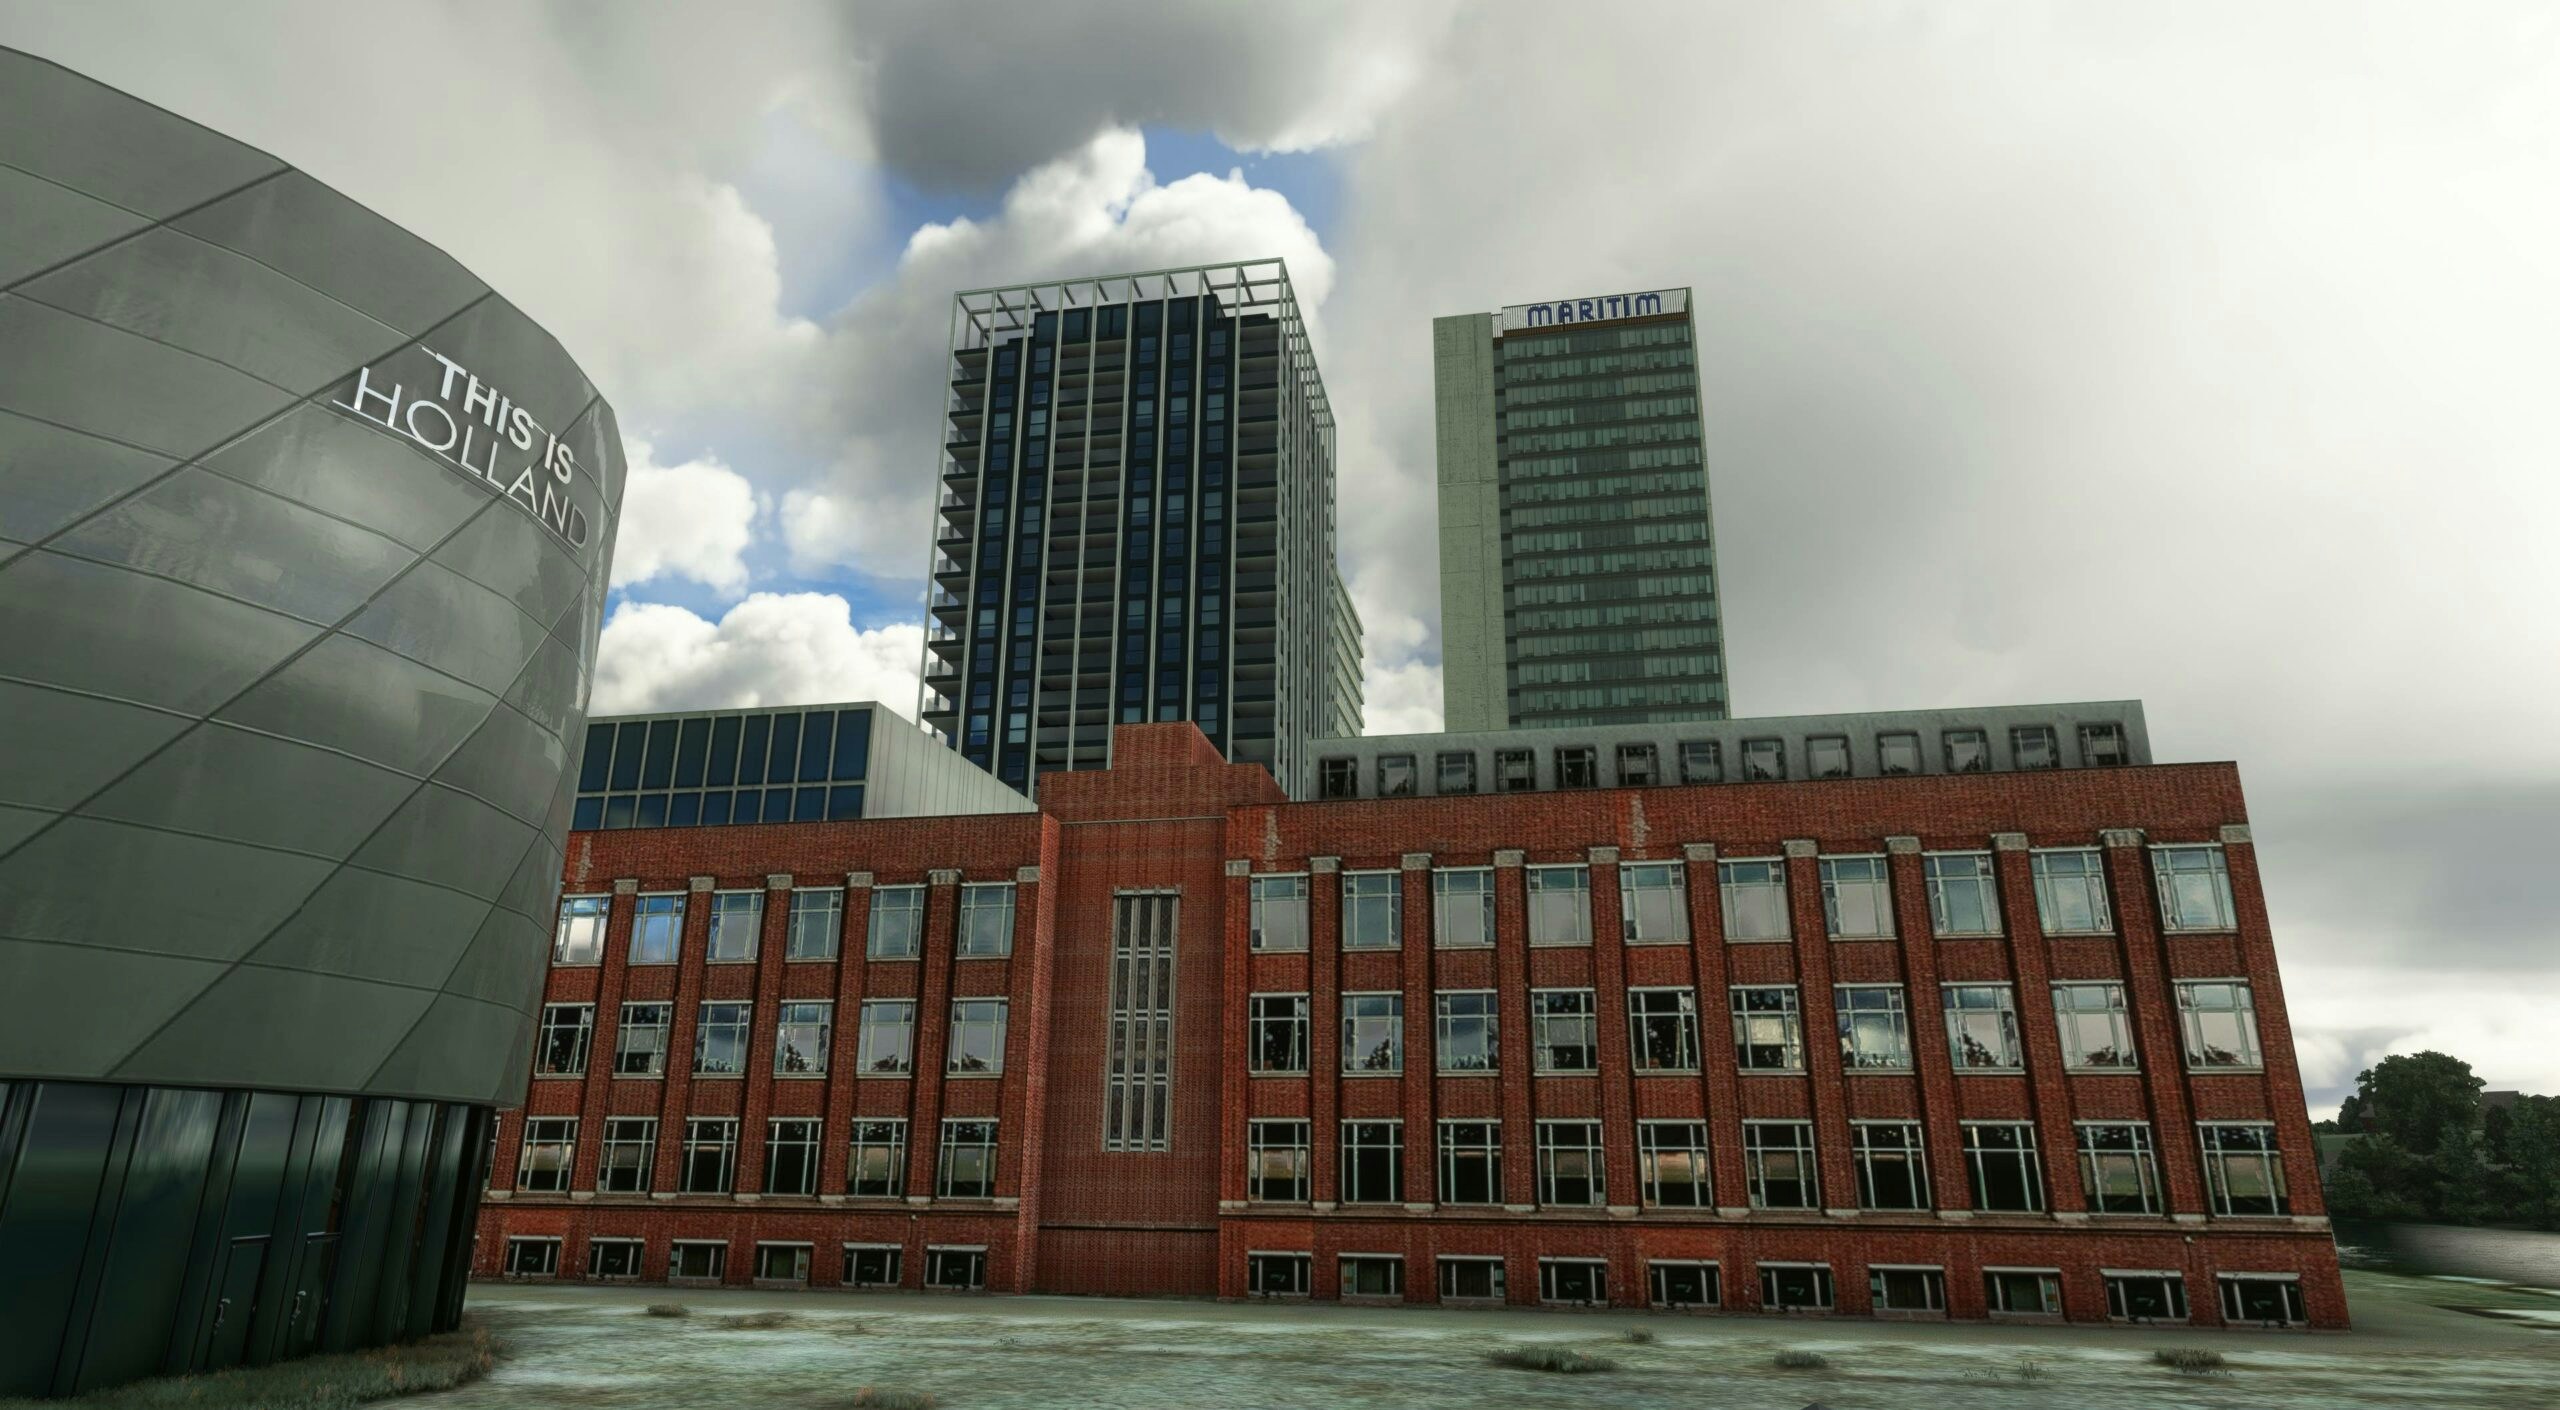 Prealsoft Releases Amsterdam Landmarks for MSFS